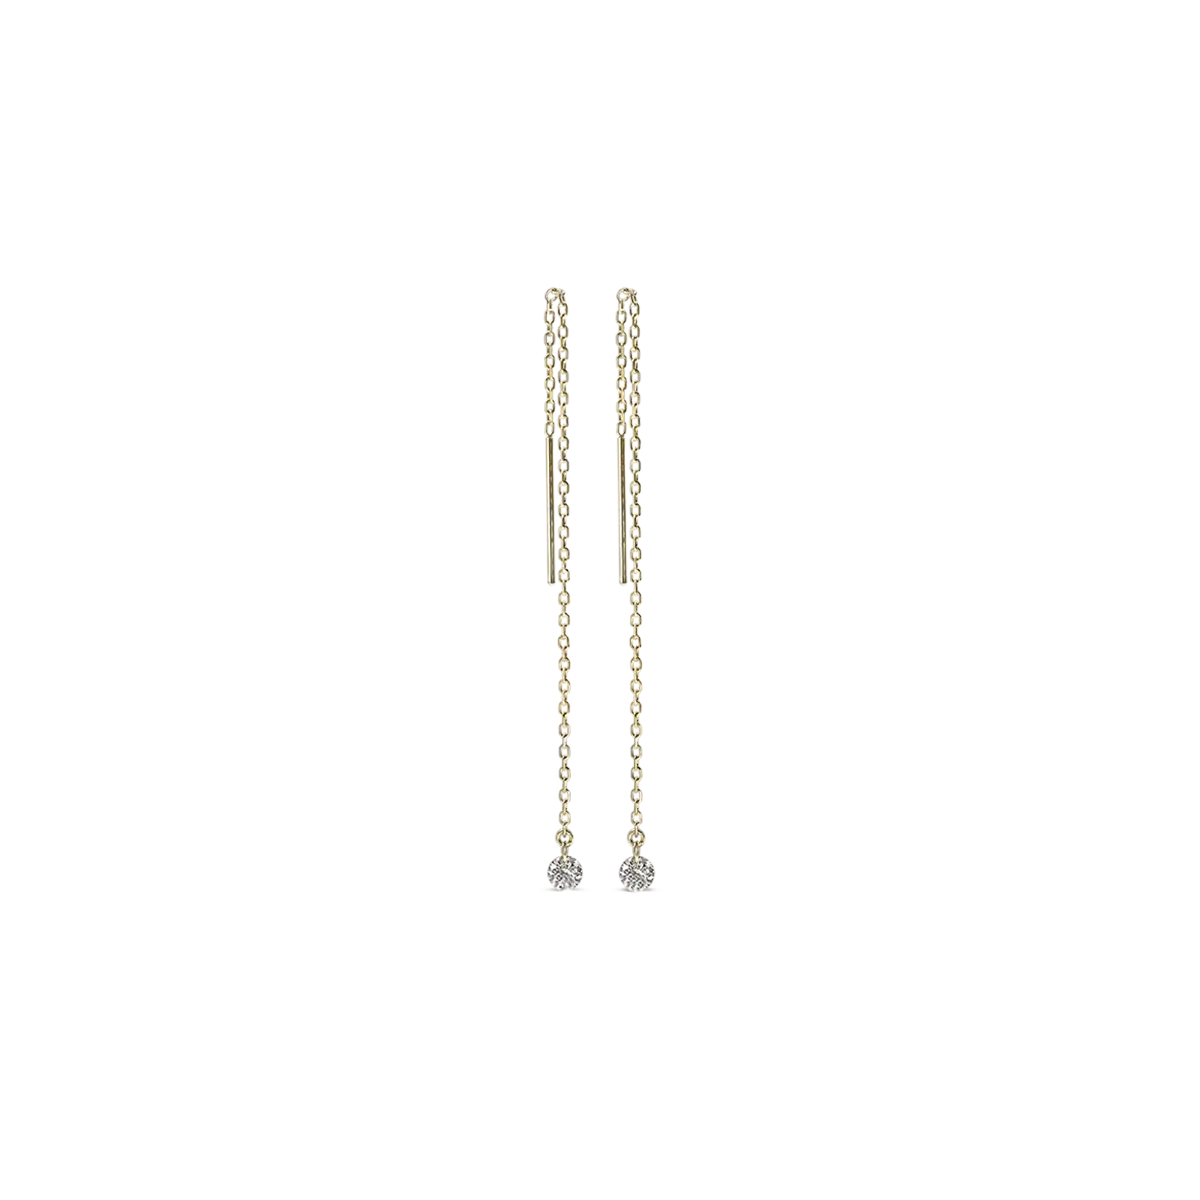 14k yellow gold with a single diamond at the bottom.   Pinhole Threaders  Dimensions: 3 1/8&quot; long  Designed by ILA Collection